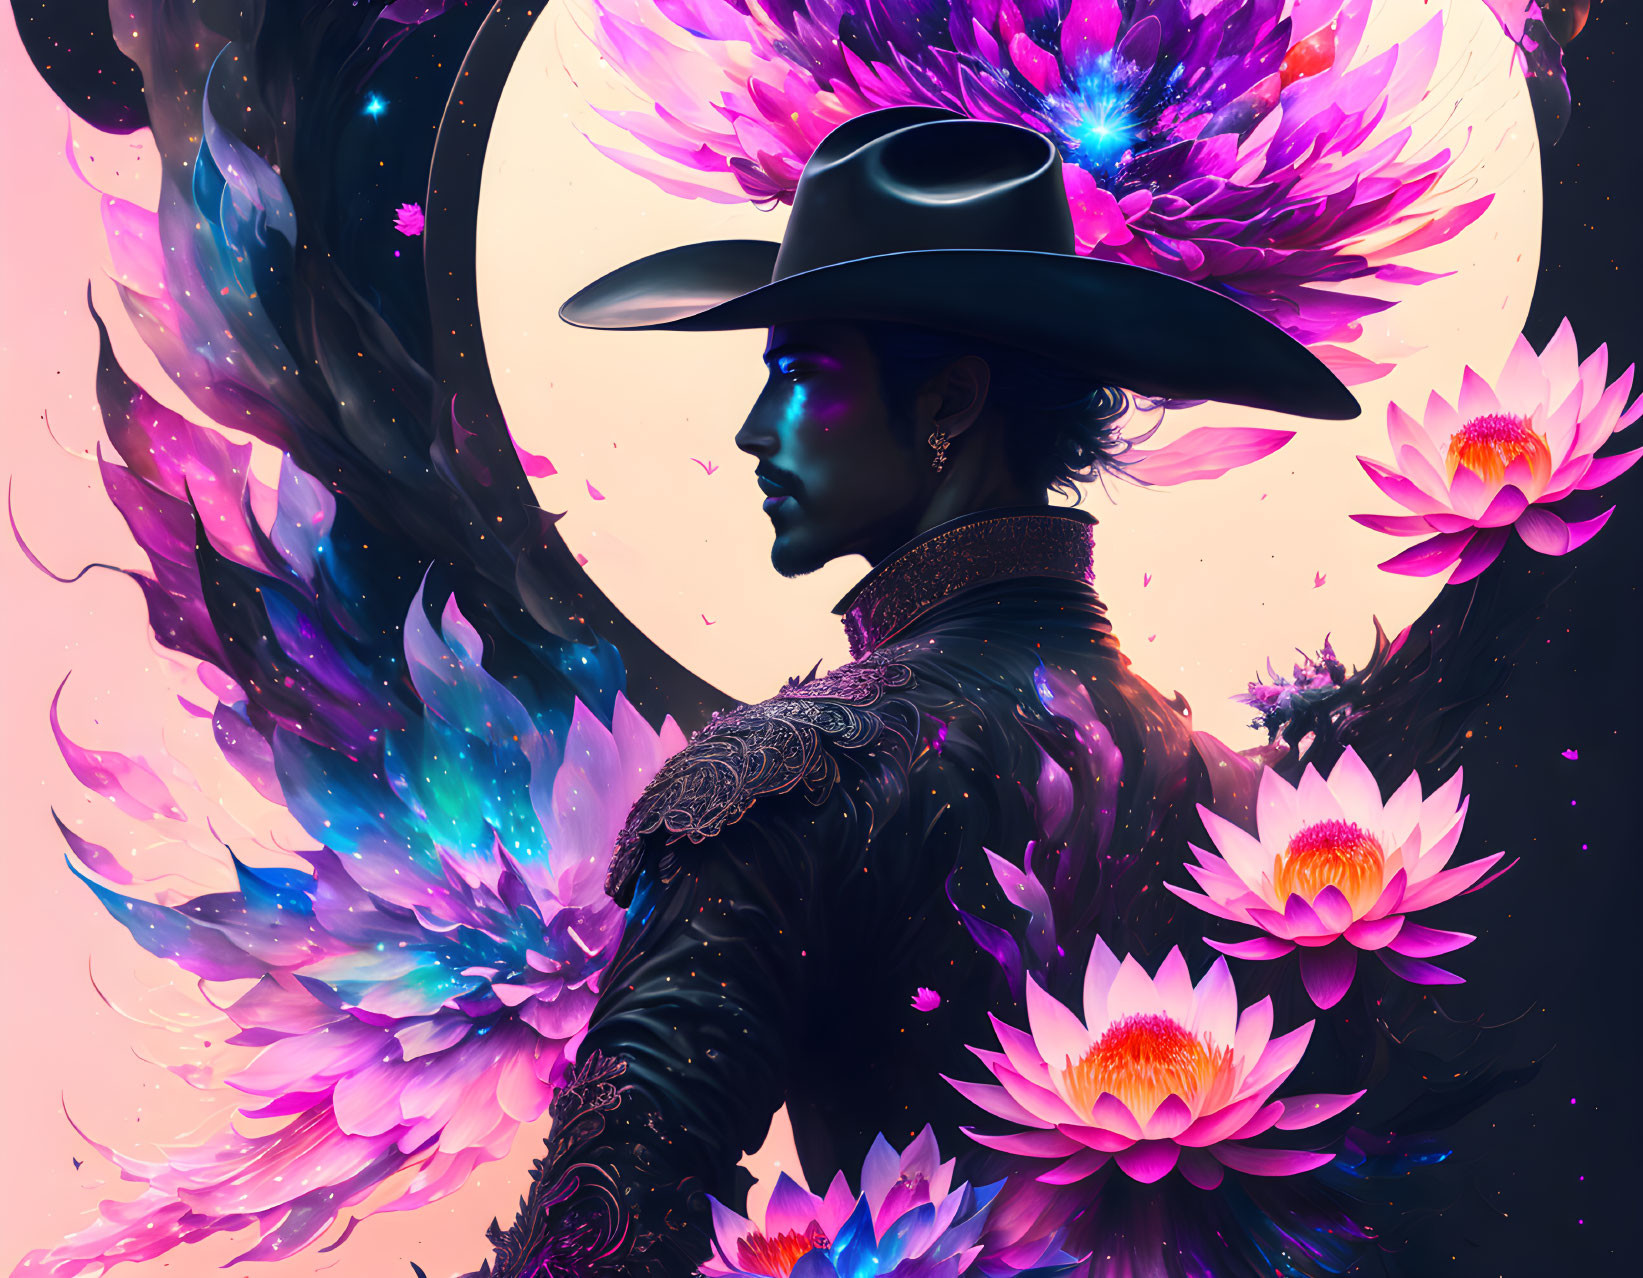 Colorful portrait with wide-brimmed hat and cosmic background.